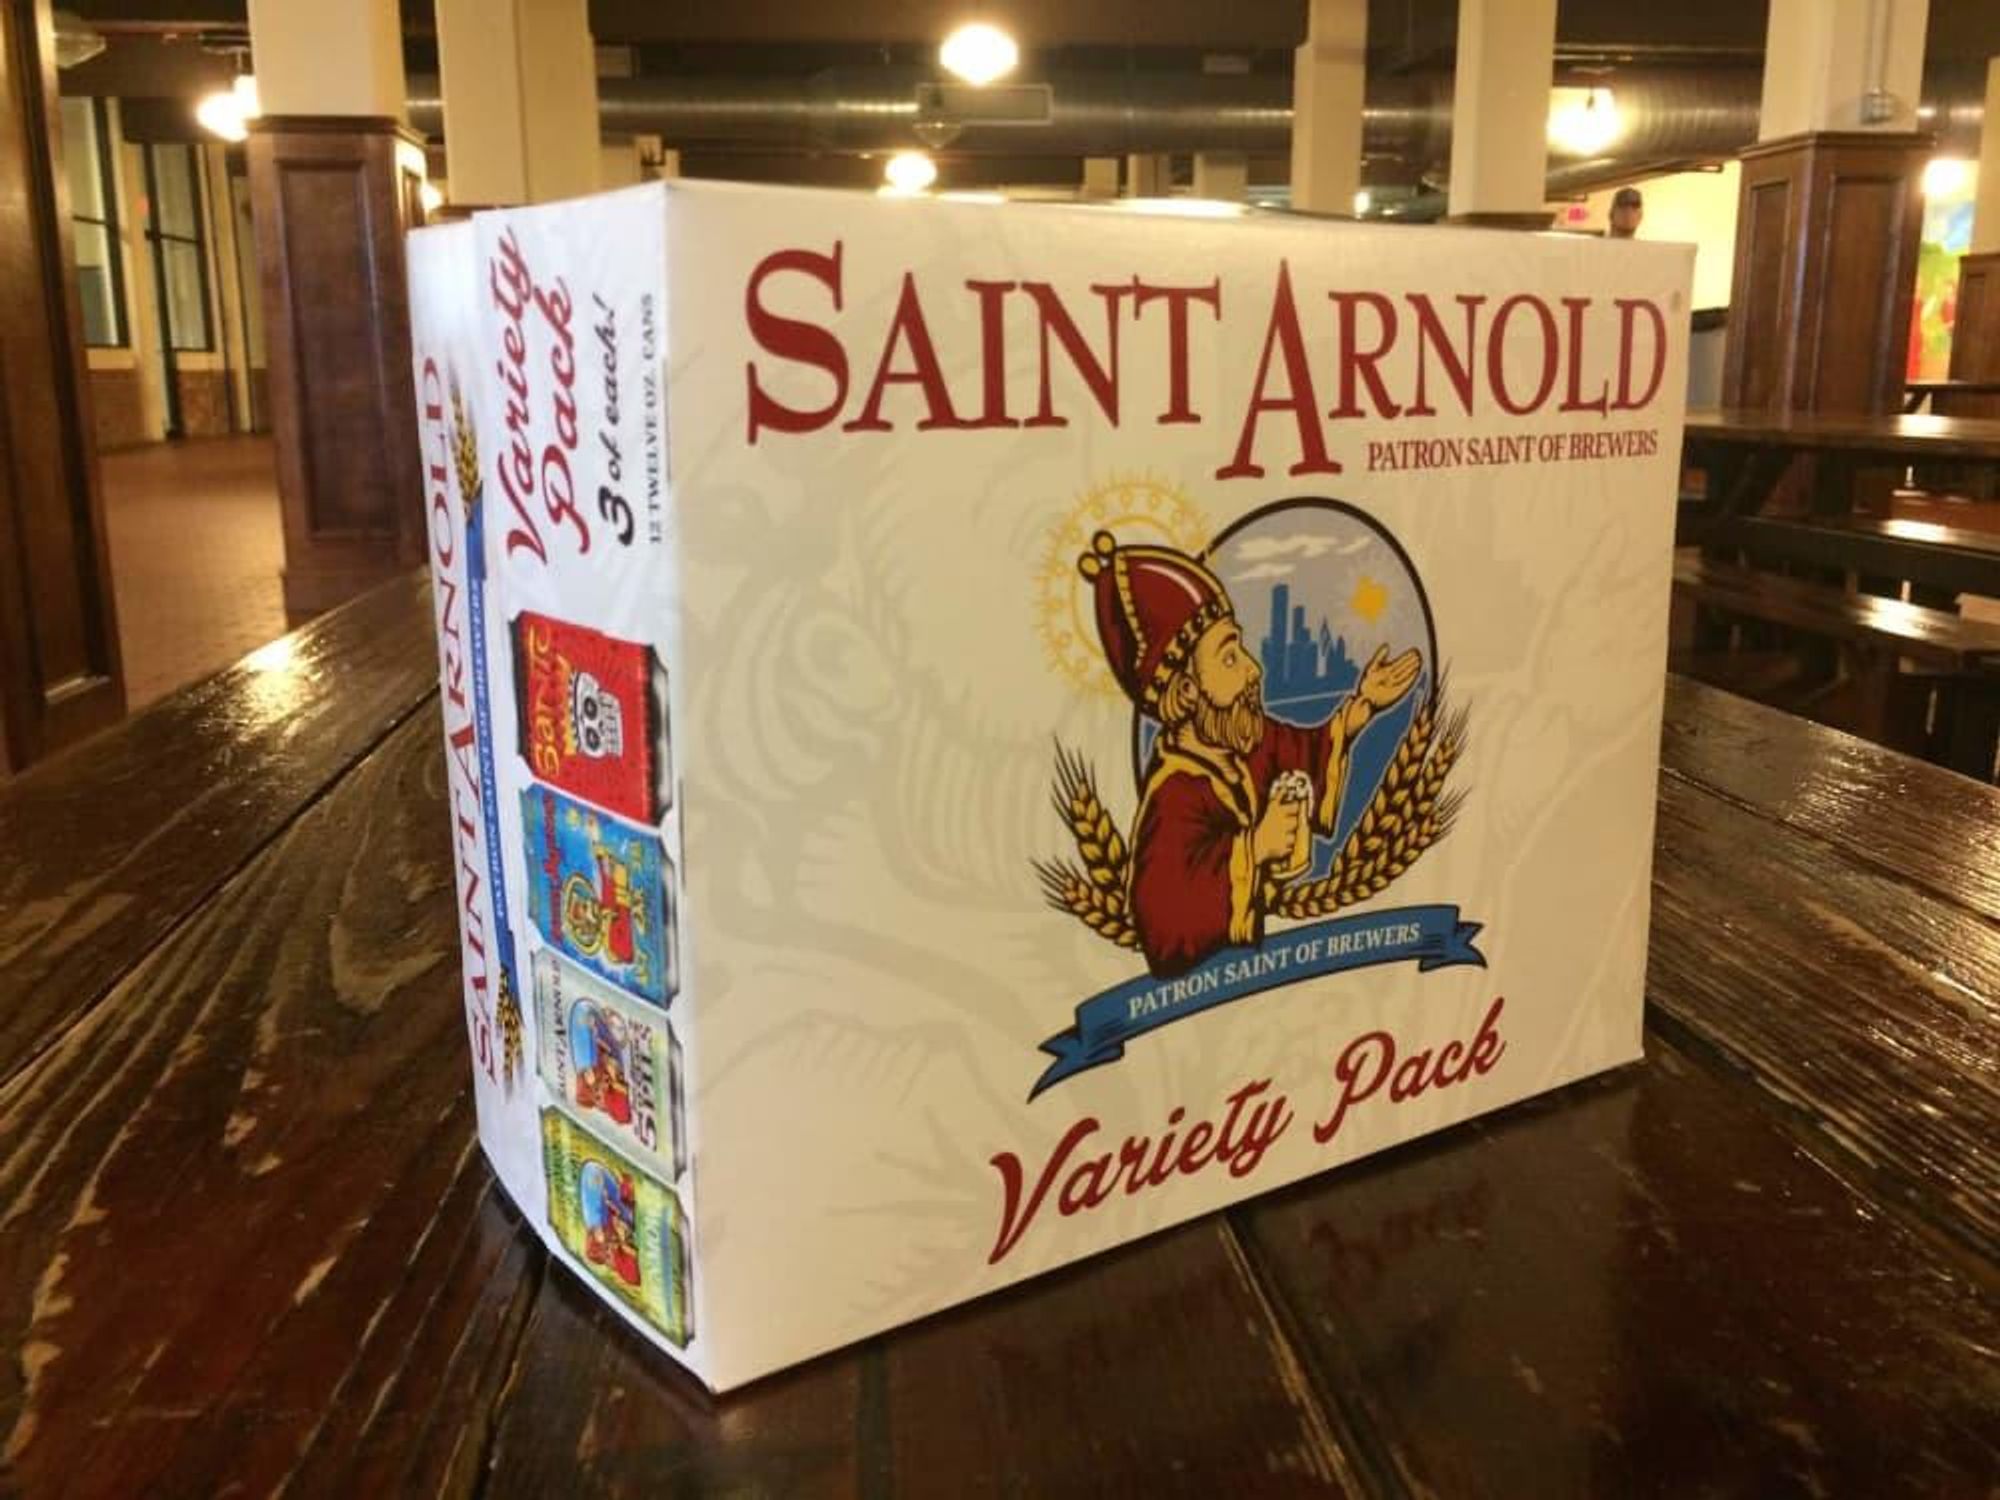 Saint Arnold Brewing Company variety pack